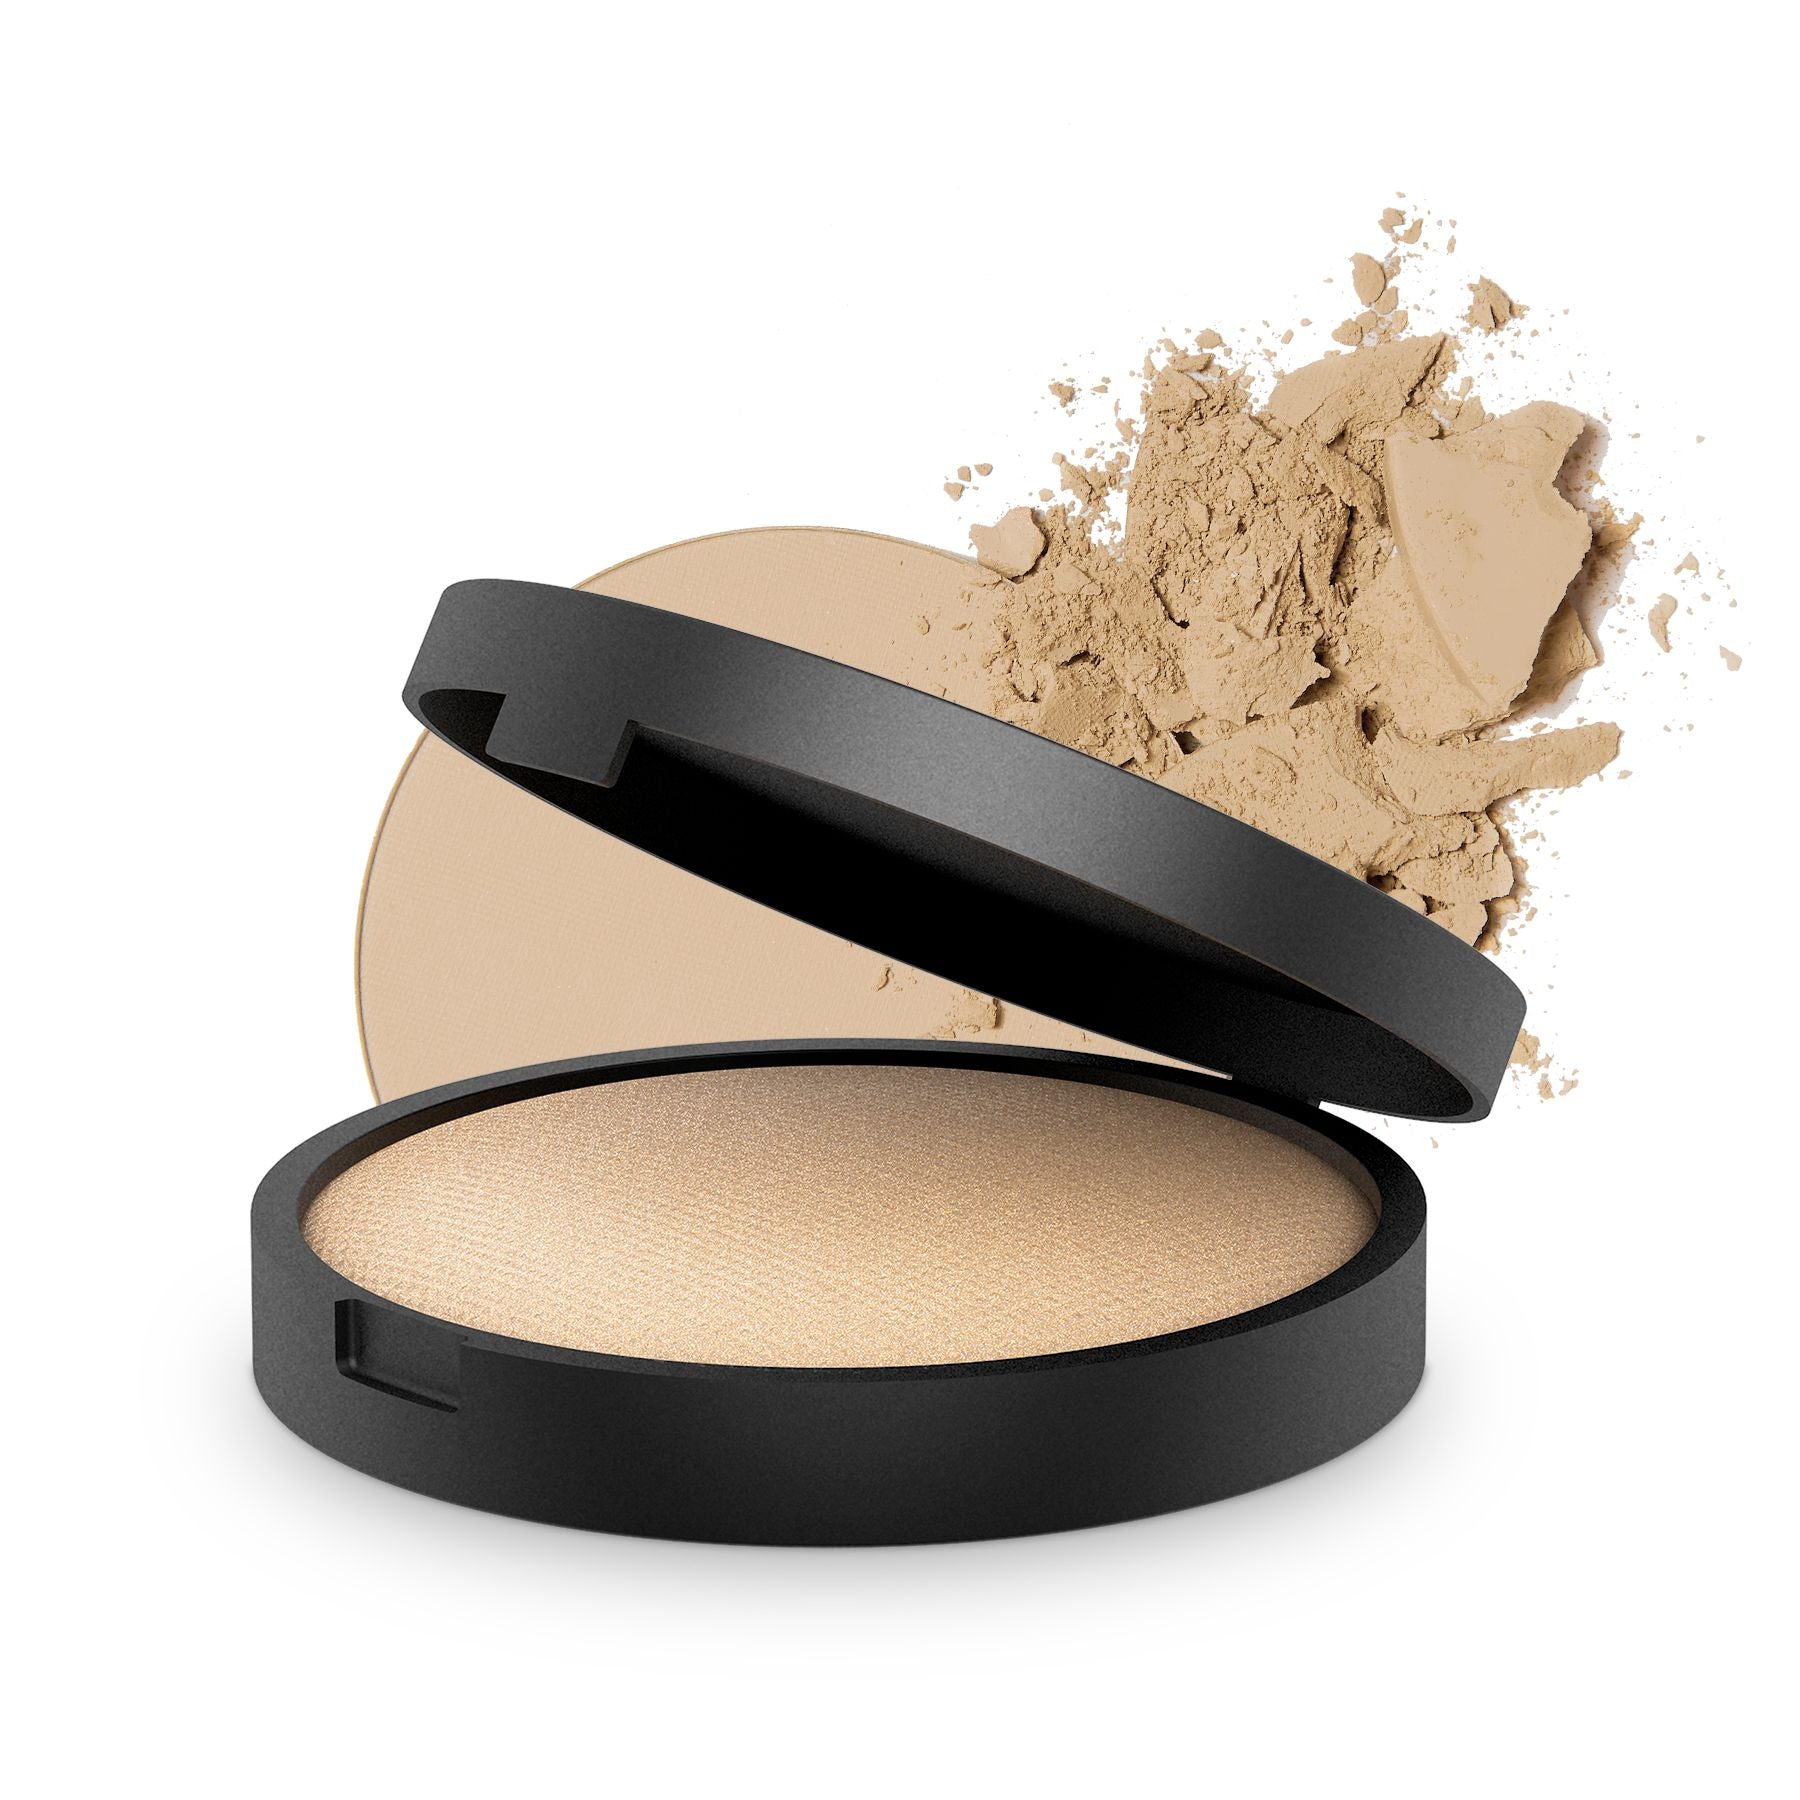 INIKA Baked Mineral Foundation 8g Grace | Cure LondonINIKA Baked Mineral Foundation 8g Grace | www.curelondon.com